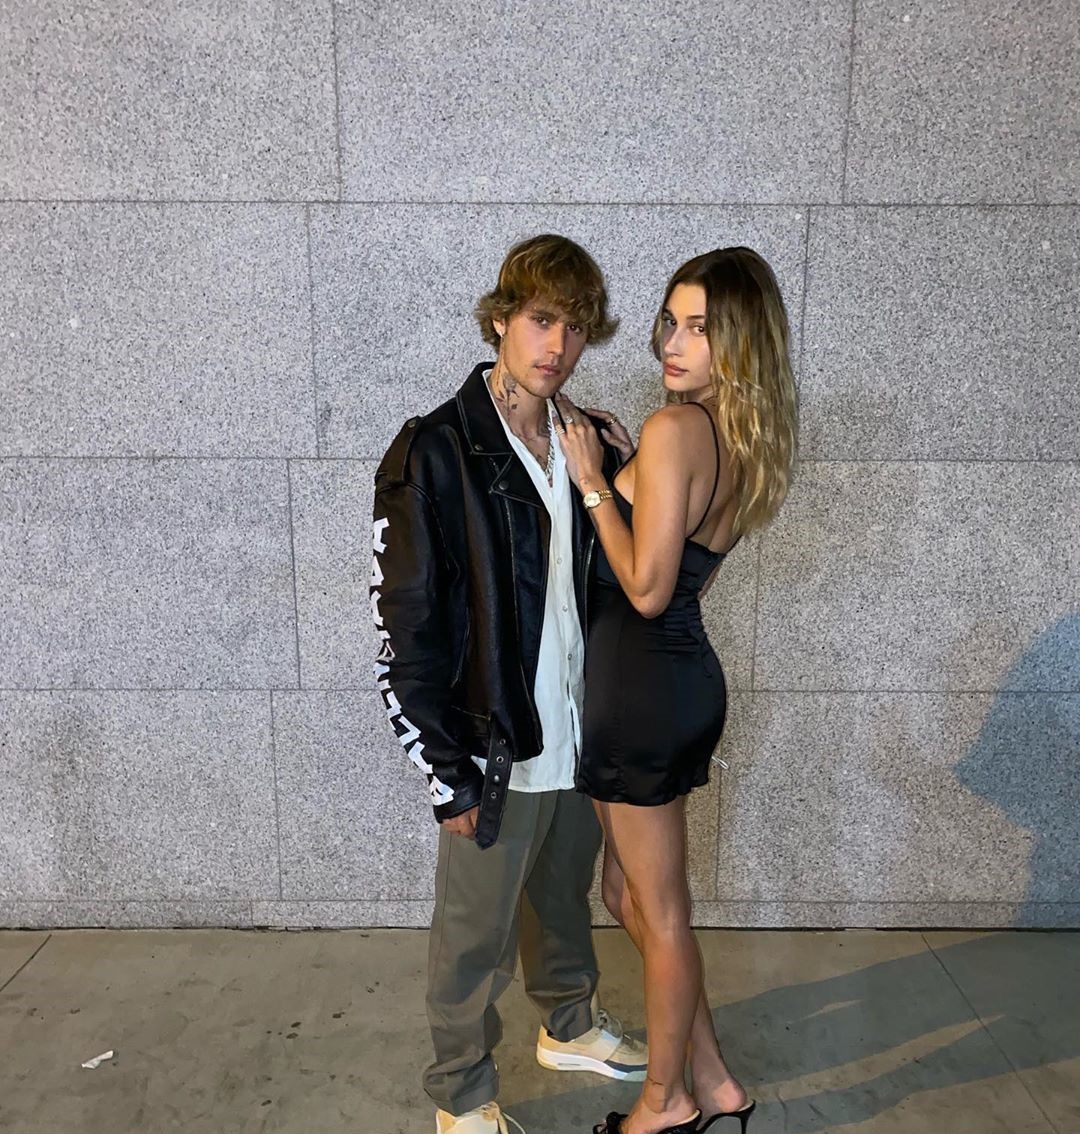 SPOTTED: Justin Bieber Rocks Balenciaga for Night Out With Hailey